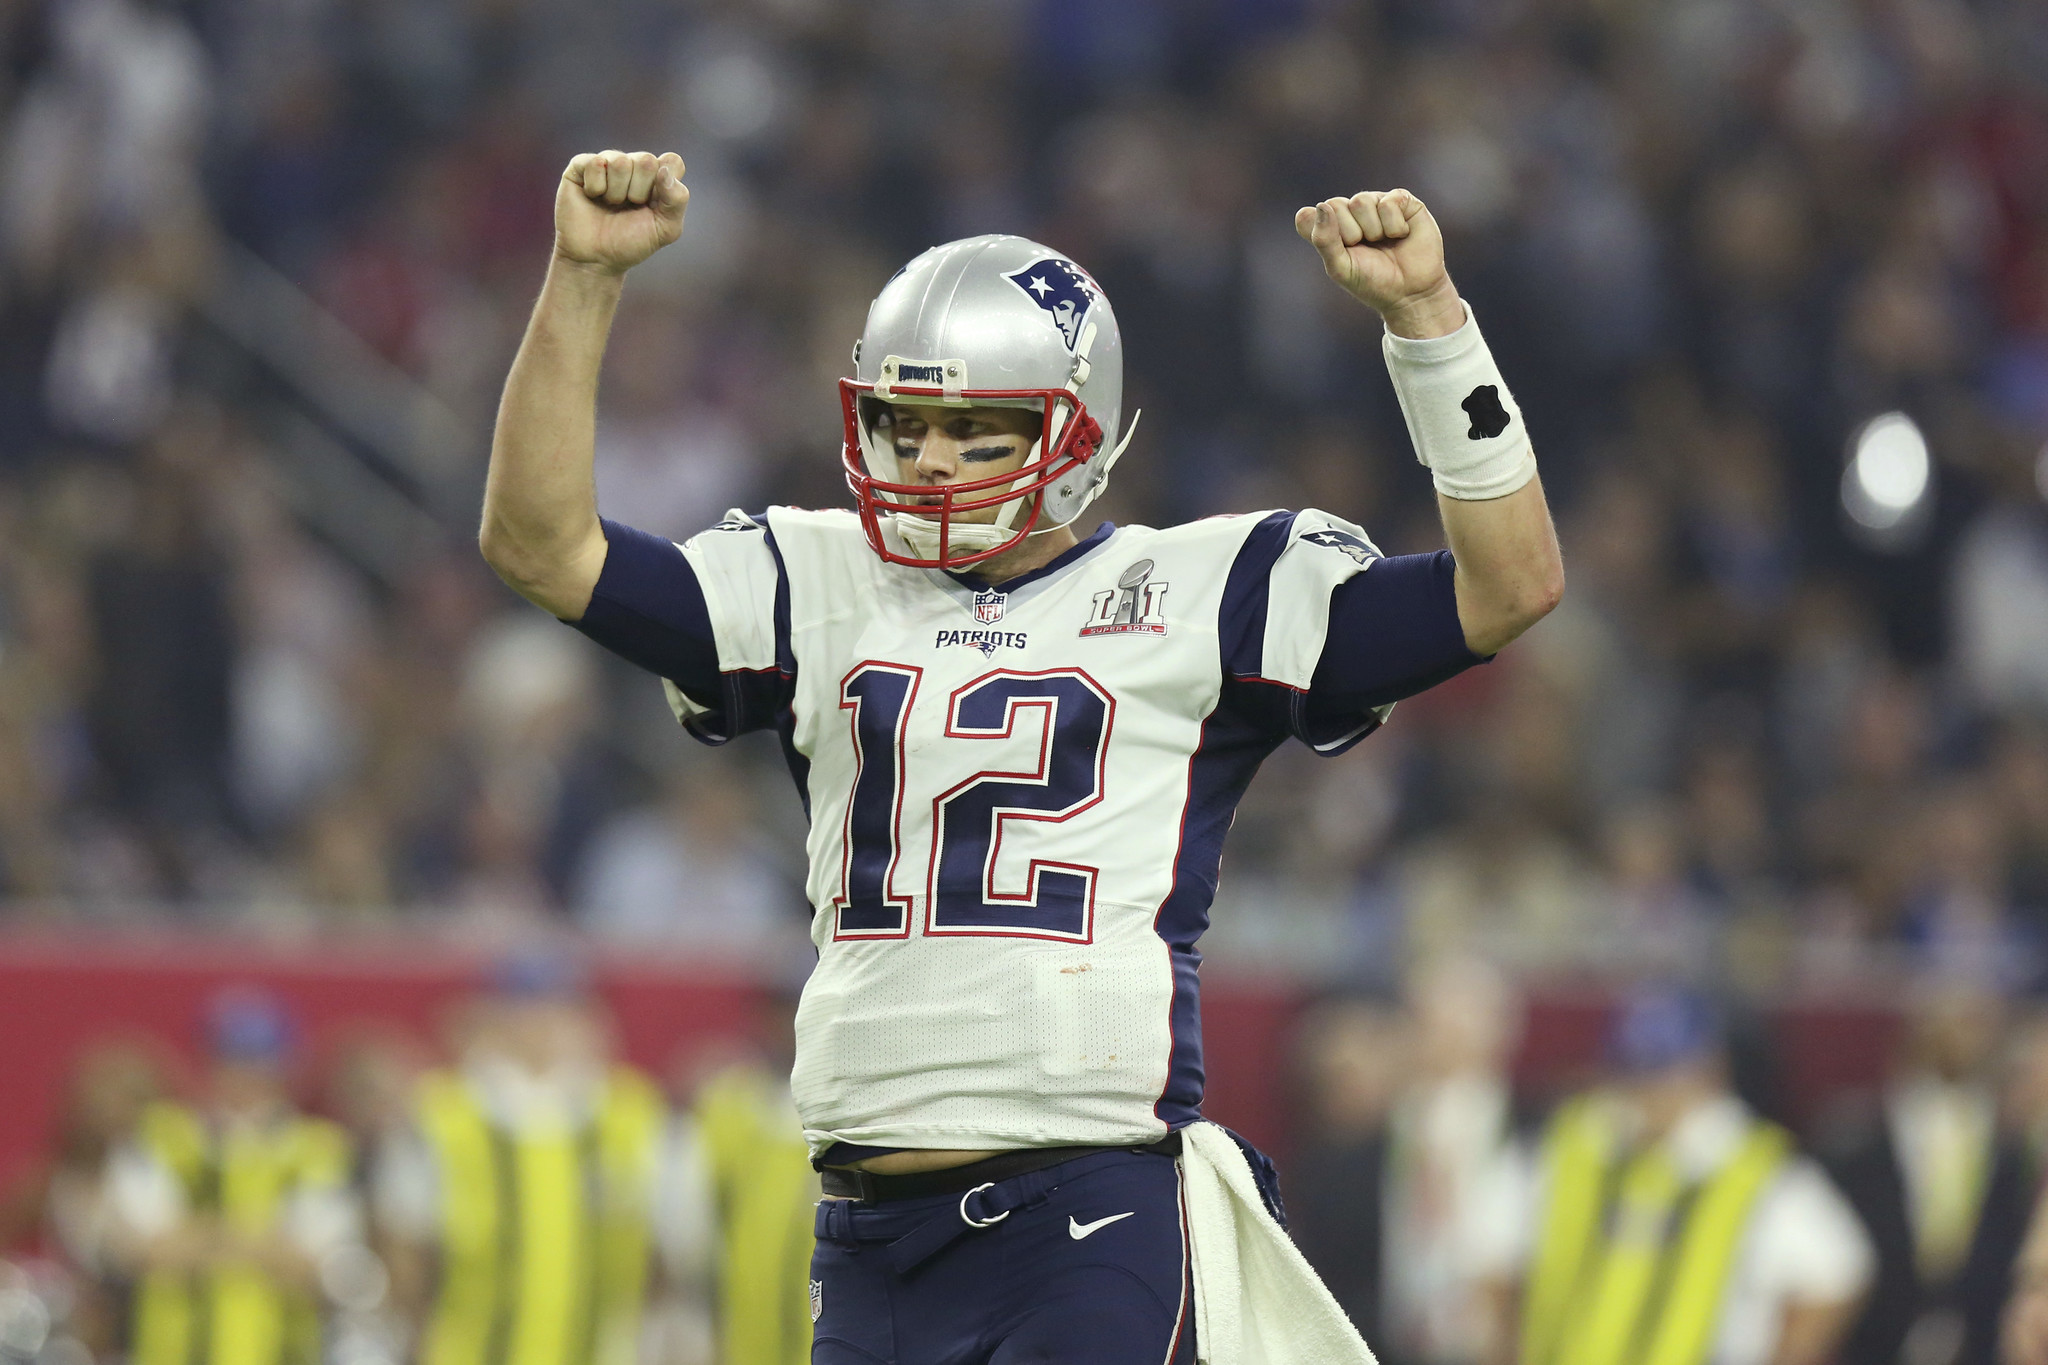 Tom Brady Might Be 39, But Shows No Signs Of Slowing Down - Chicago Tribune2048 x 1365